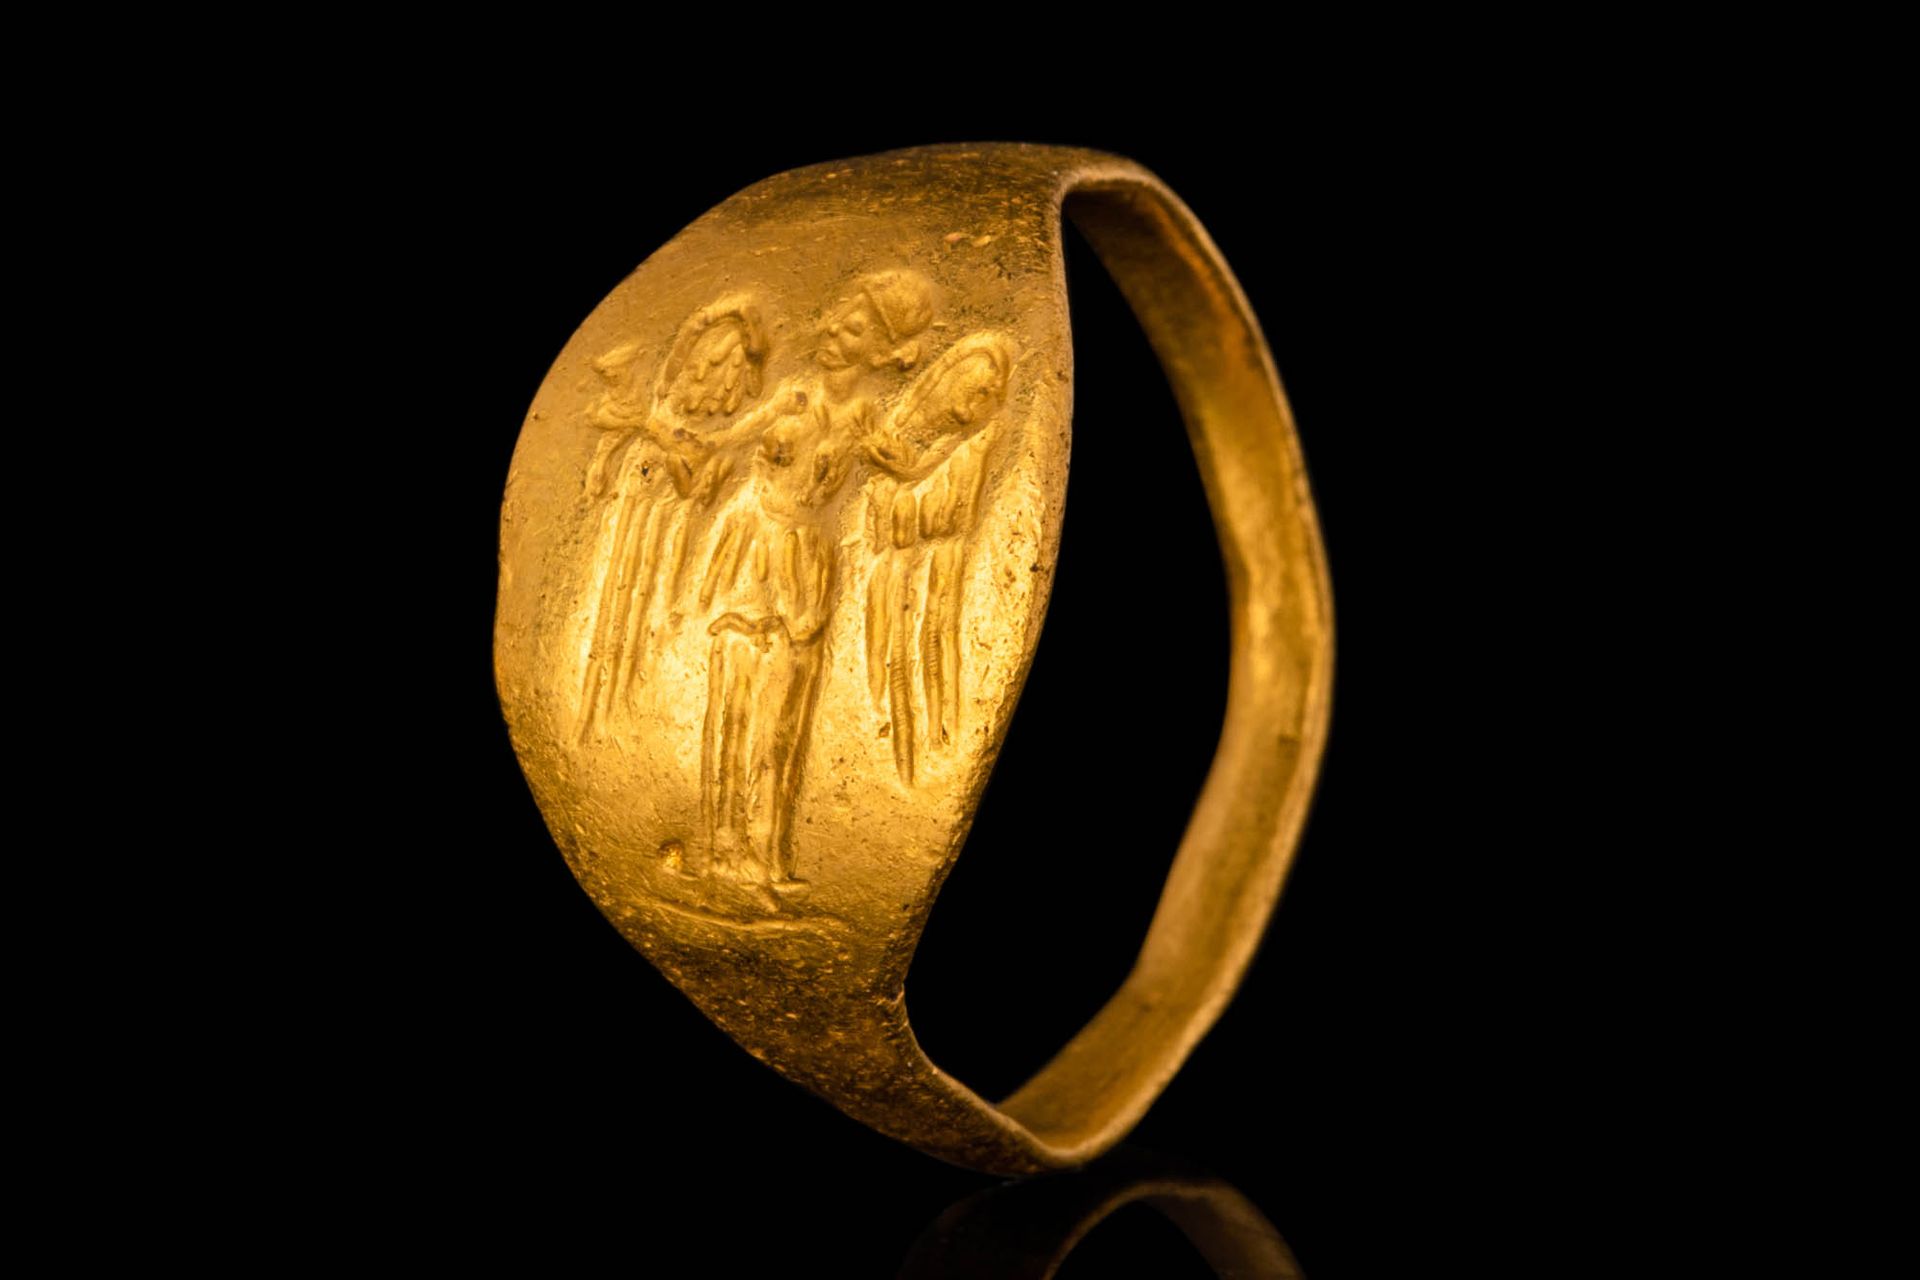 GREEK HELLENISTIC GOLD RING WITH NIKE Ca. 300 - 100 A.C.
Impresionante anillo de&hellip;